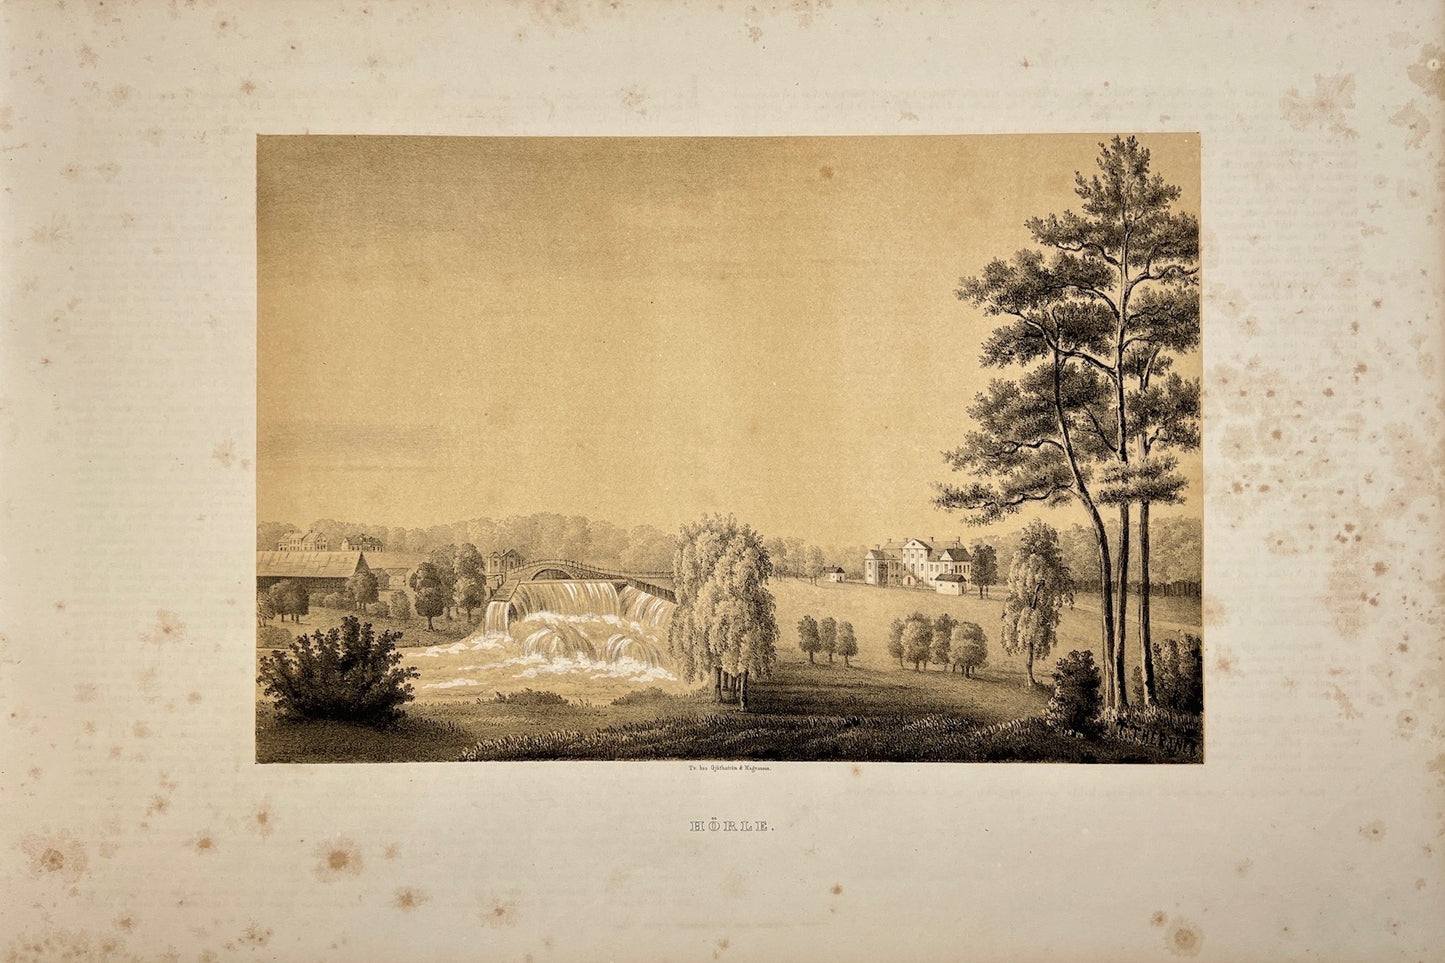 Antique Print - View of Horle Mansion - Varnamo Municipality - Jonkoping County